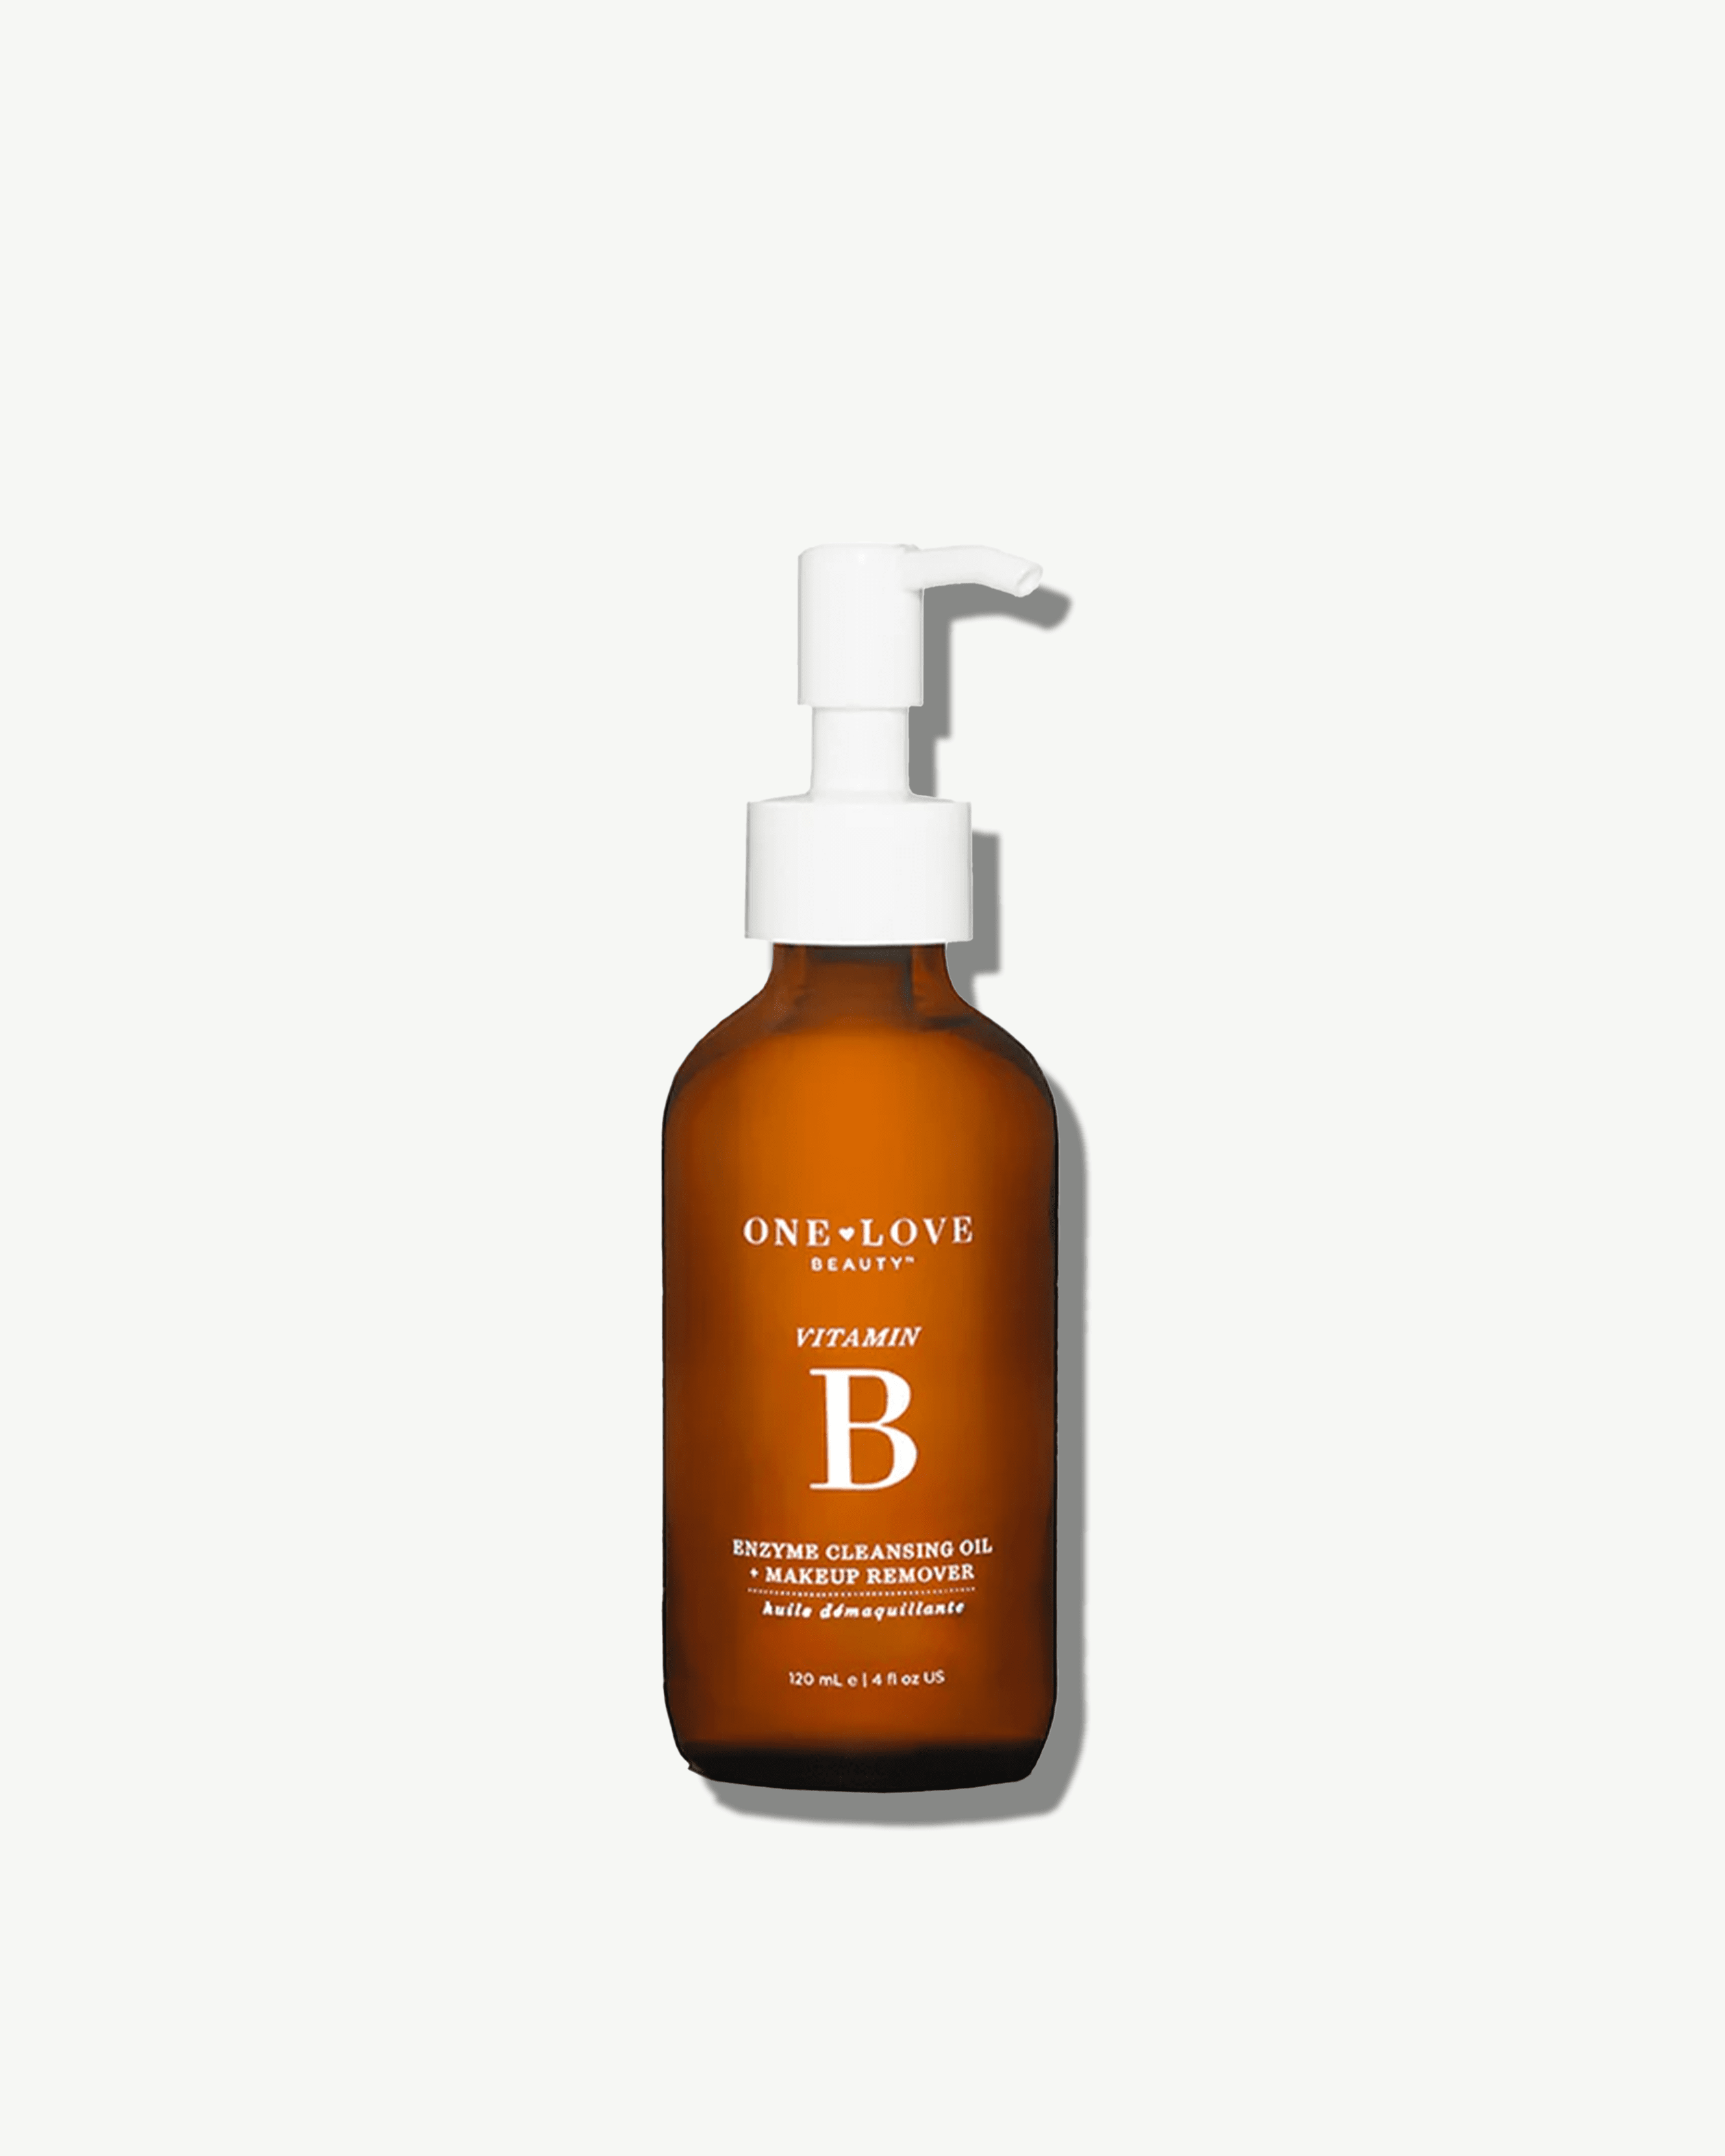 One Love Organics Botanical B Enzyme Cleansing Oil + Makeup